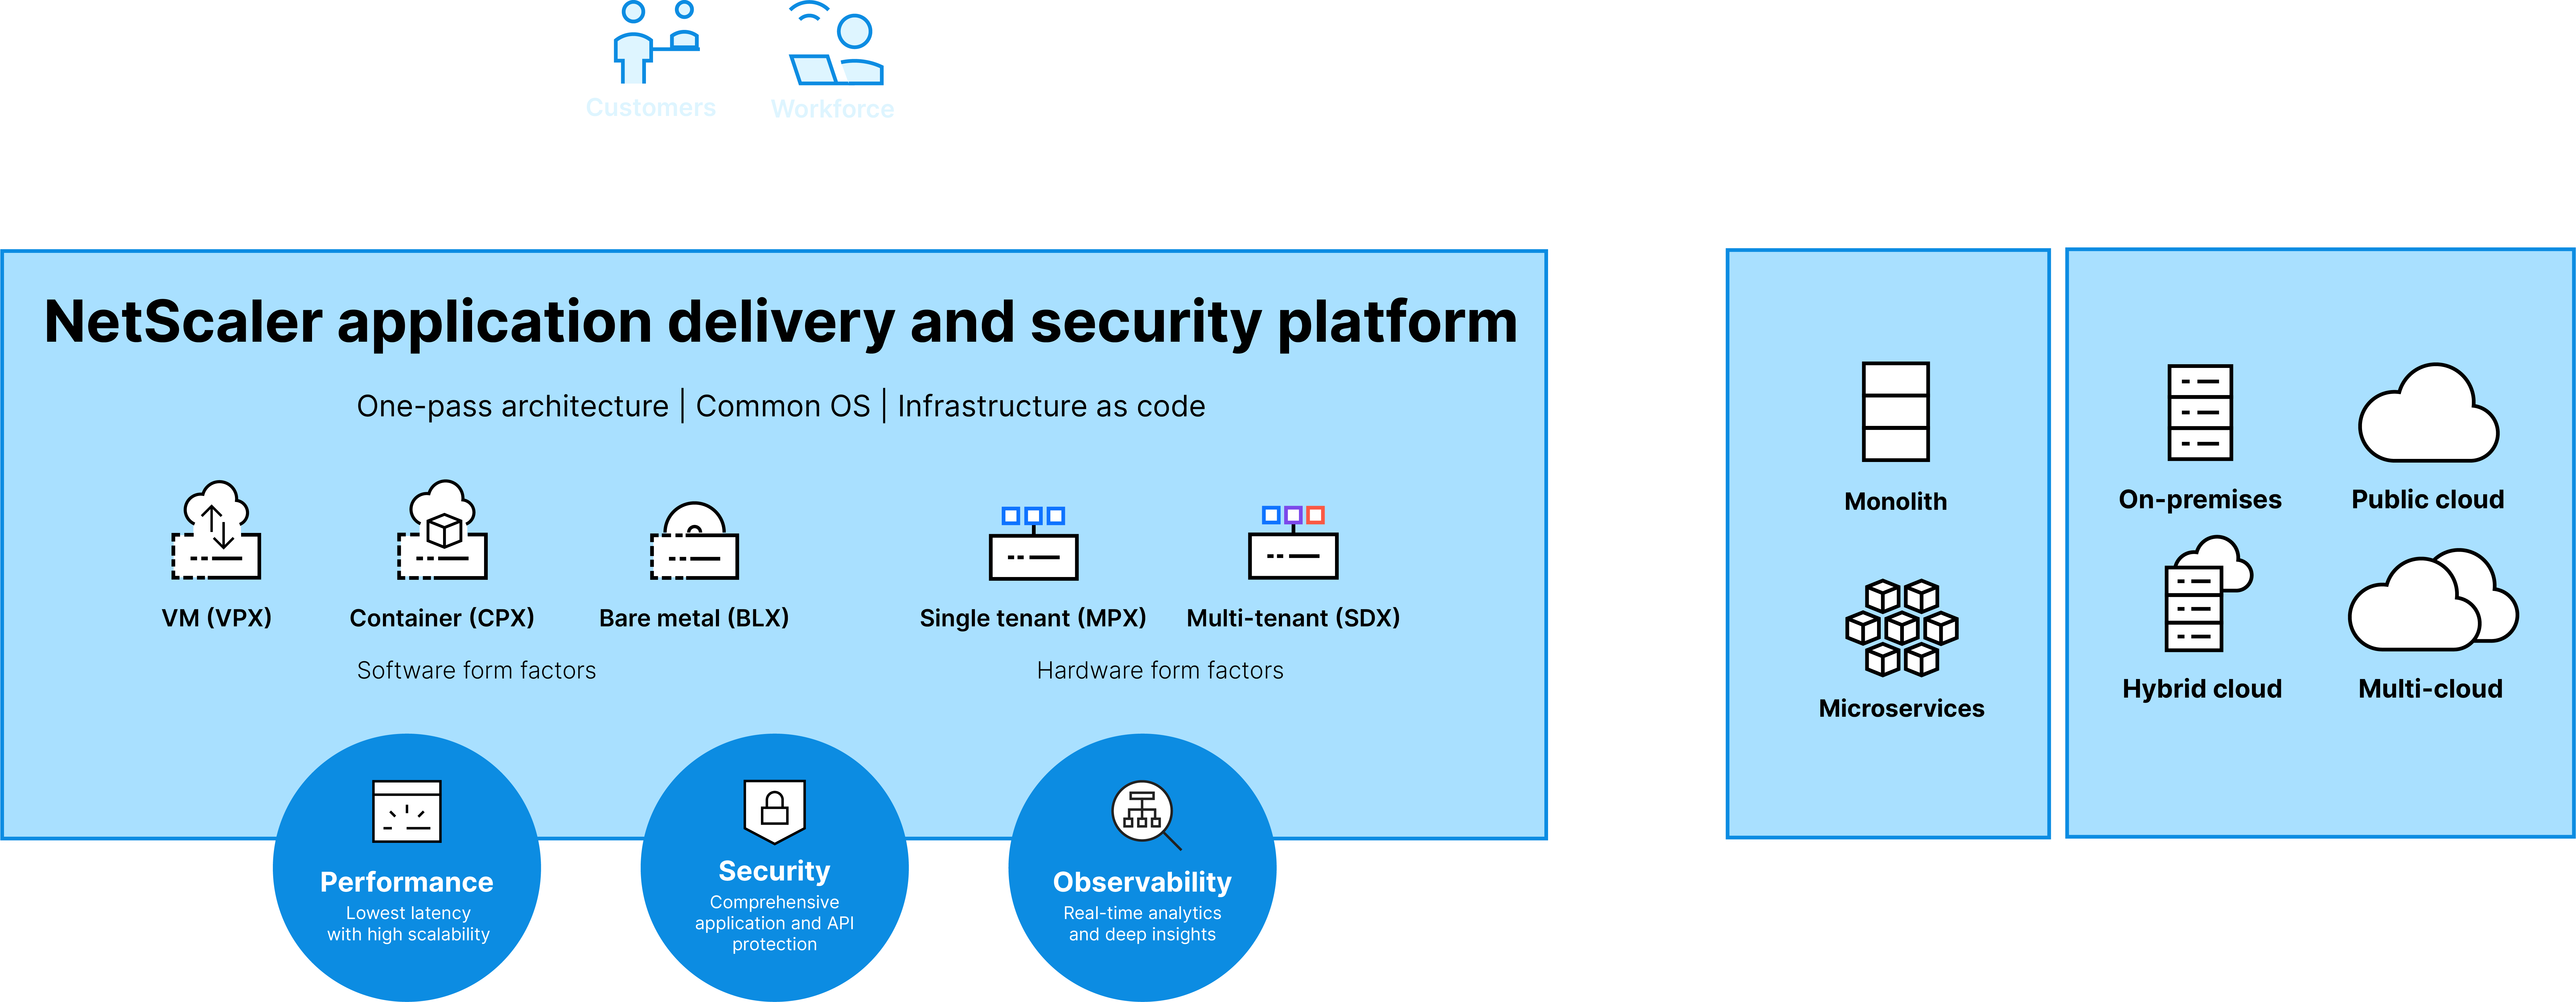 netscaler-application-delivery-and-security-platform